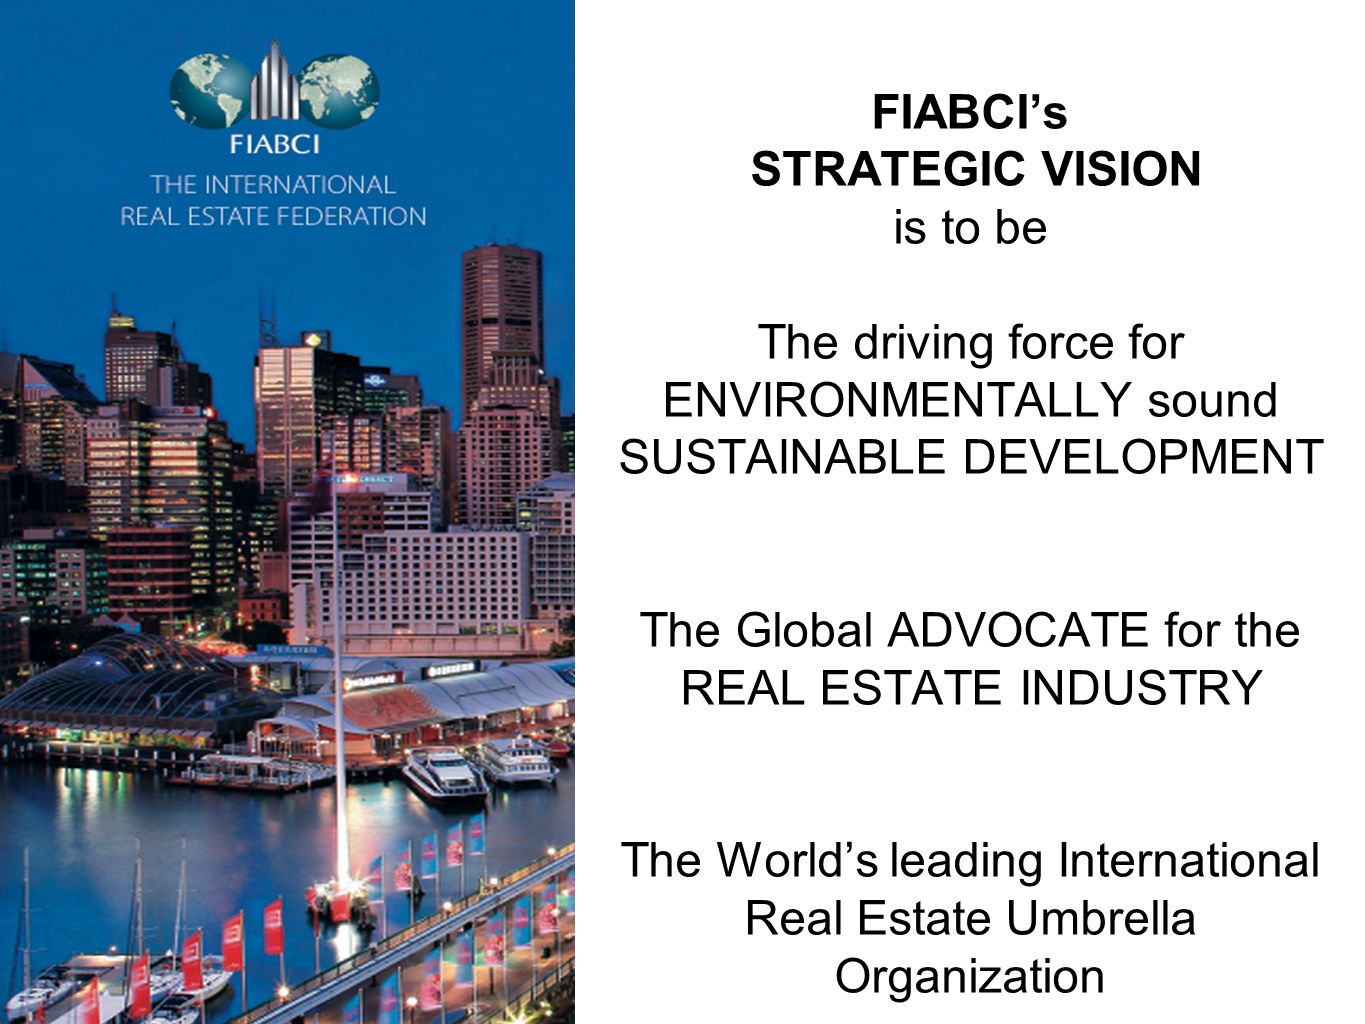 FIABCI’s STRATEGIC VISION is to be The driving force for ENVIRONMENTALLY sound SUSTAINABLE DEVELOPMENT The Global ADVOCATE for the REAL ESTATE INDUSTRY The World’s leading International Real Estate Umbrella Organization